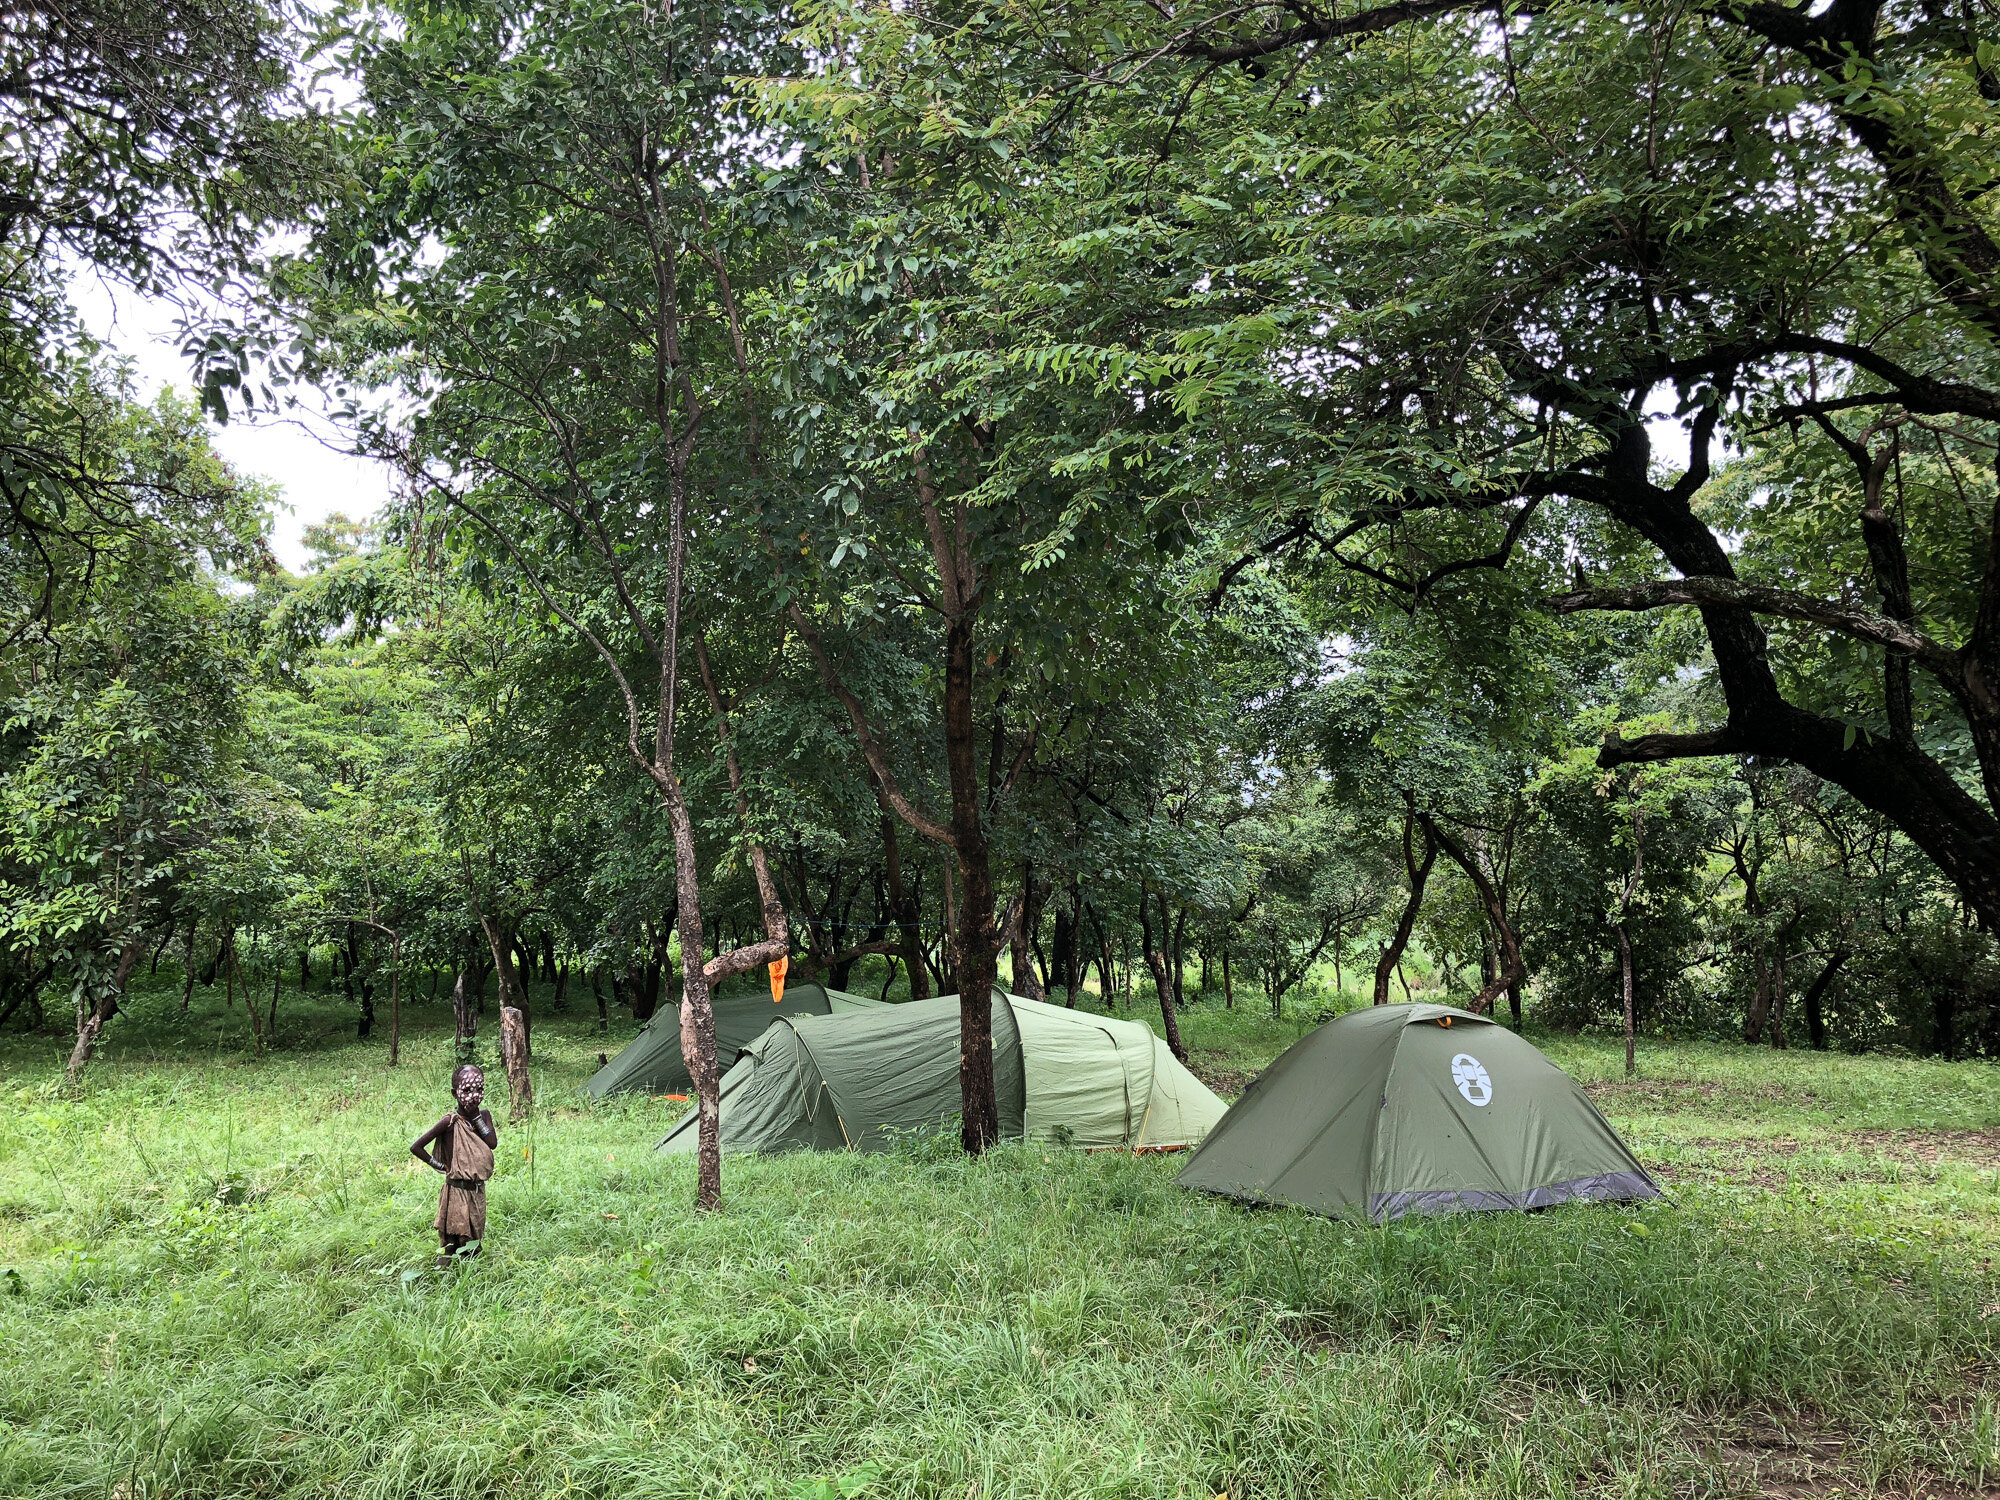 Our remote camp